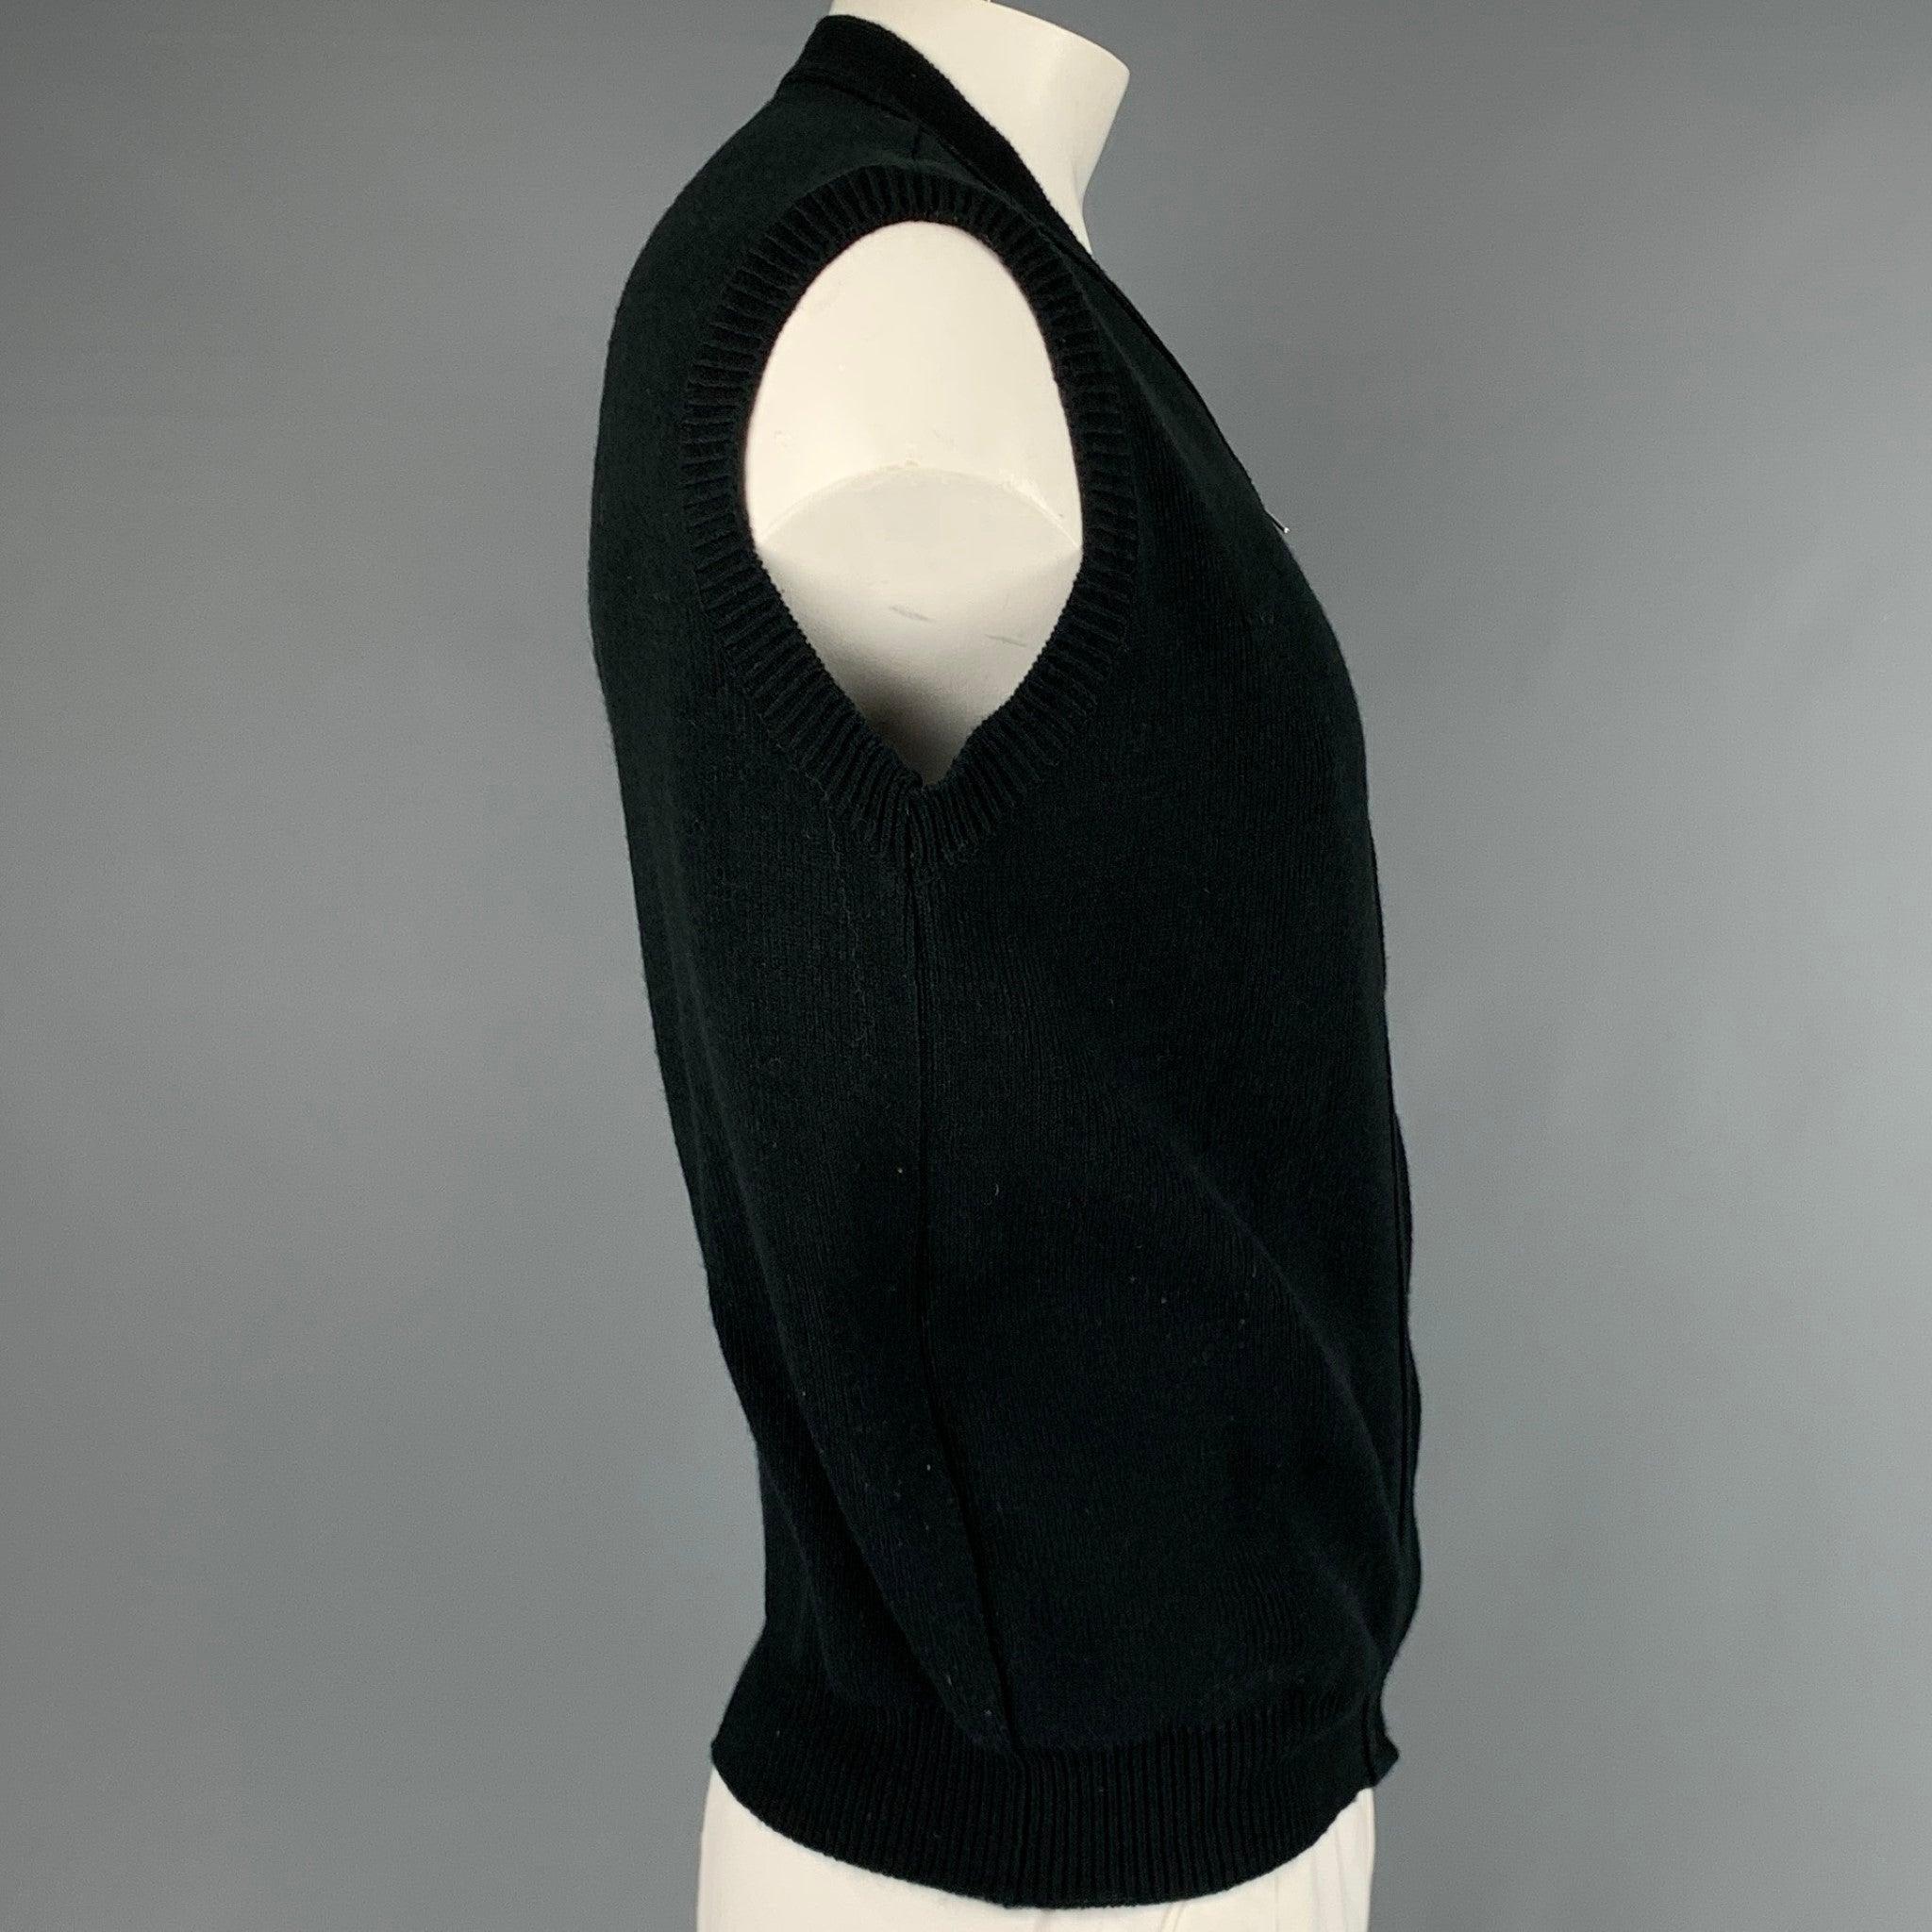 COMME des GARCONS HOMME vest
in a
black acrylic knit featuring V-neck and zip closure. Made in Scotland.Excellent Pre-Owned Condition. 

Marked:   L 

Measurements: 
 
Shoulder: 17 inches Chest: 43 inches Length: 24.5 inches 
  
  
 
Reference No.: